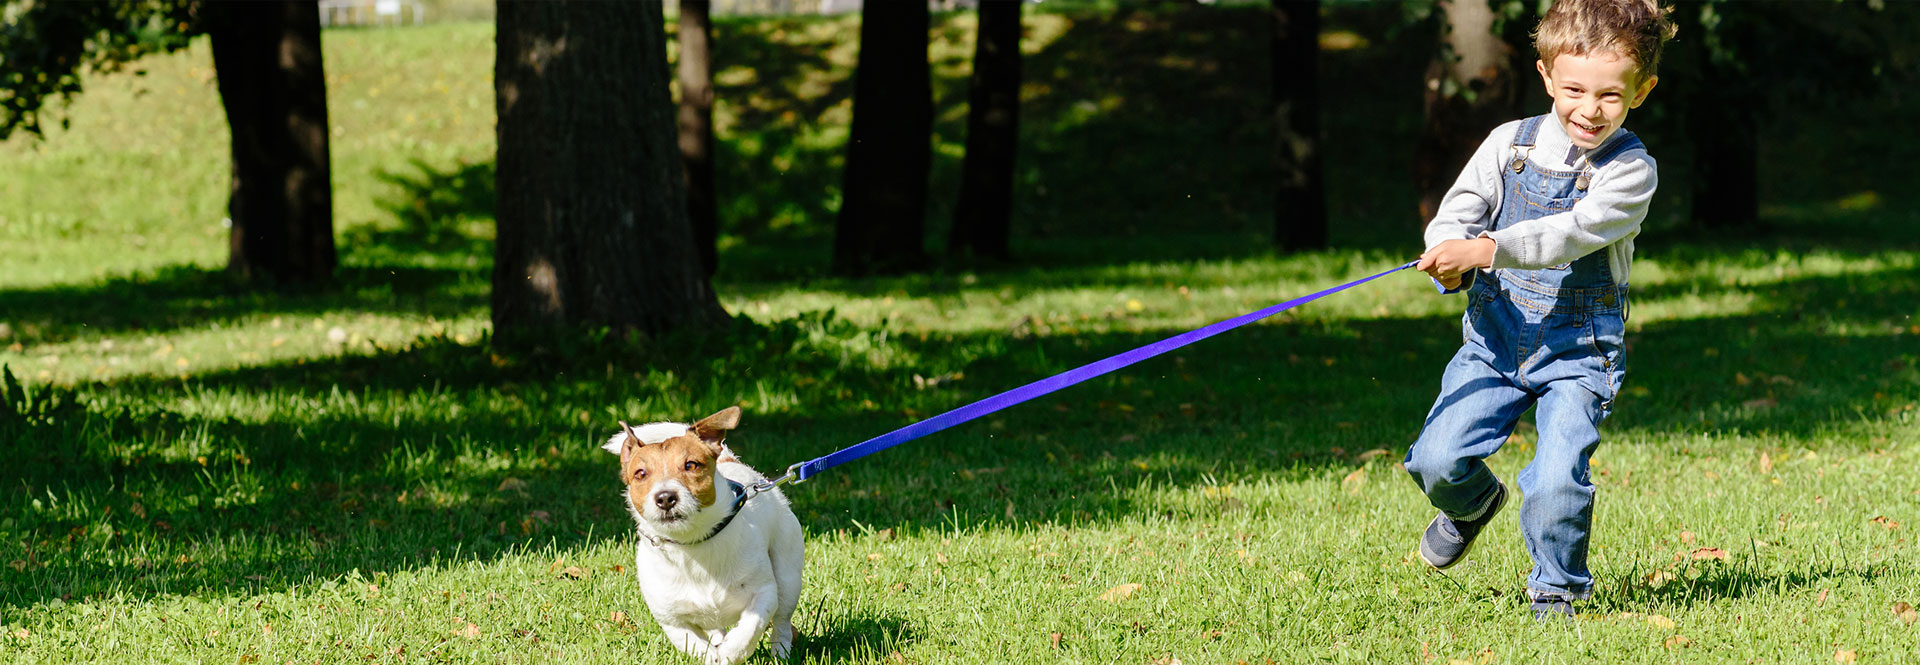 How do I get my dog to stop pulling on the leash? | Exfed ...